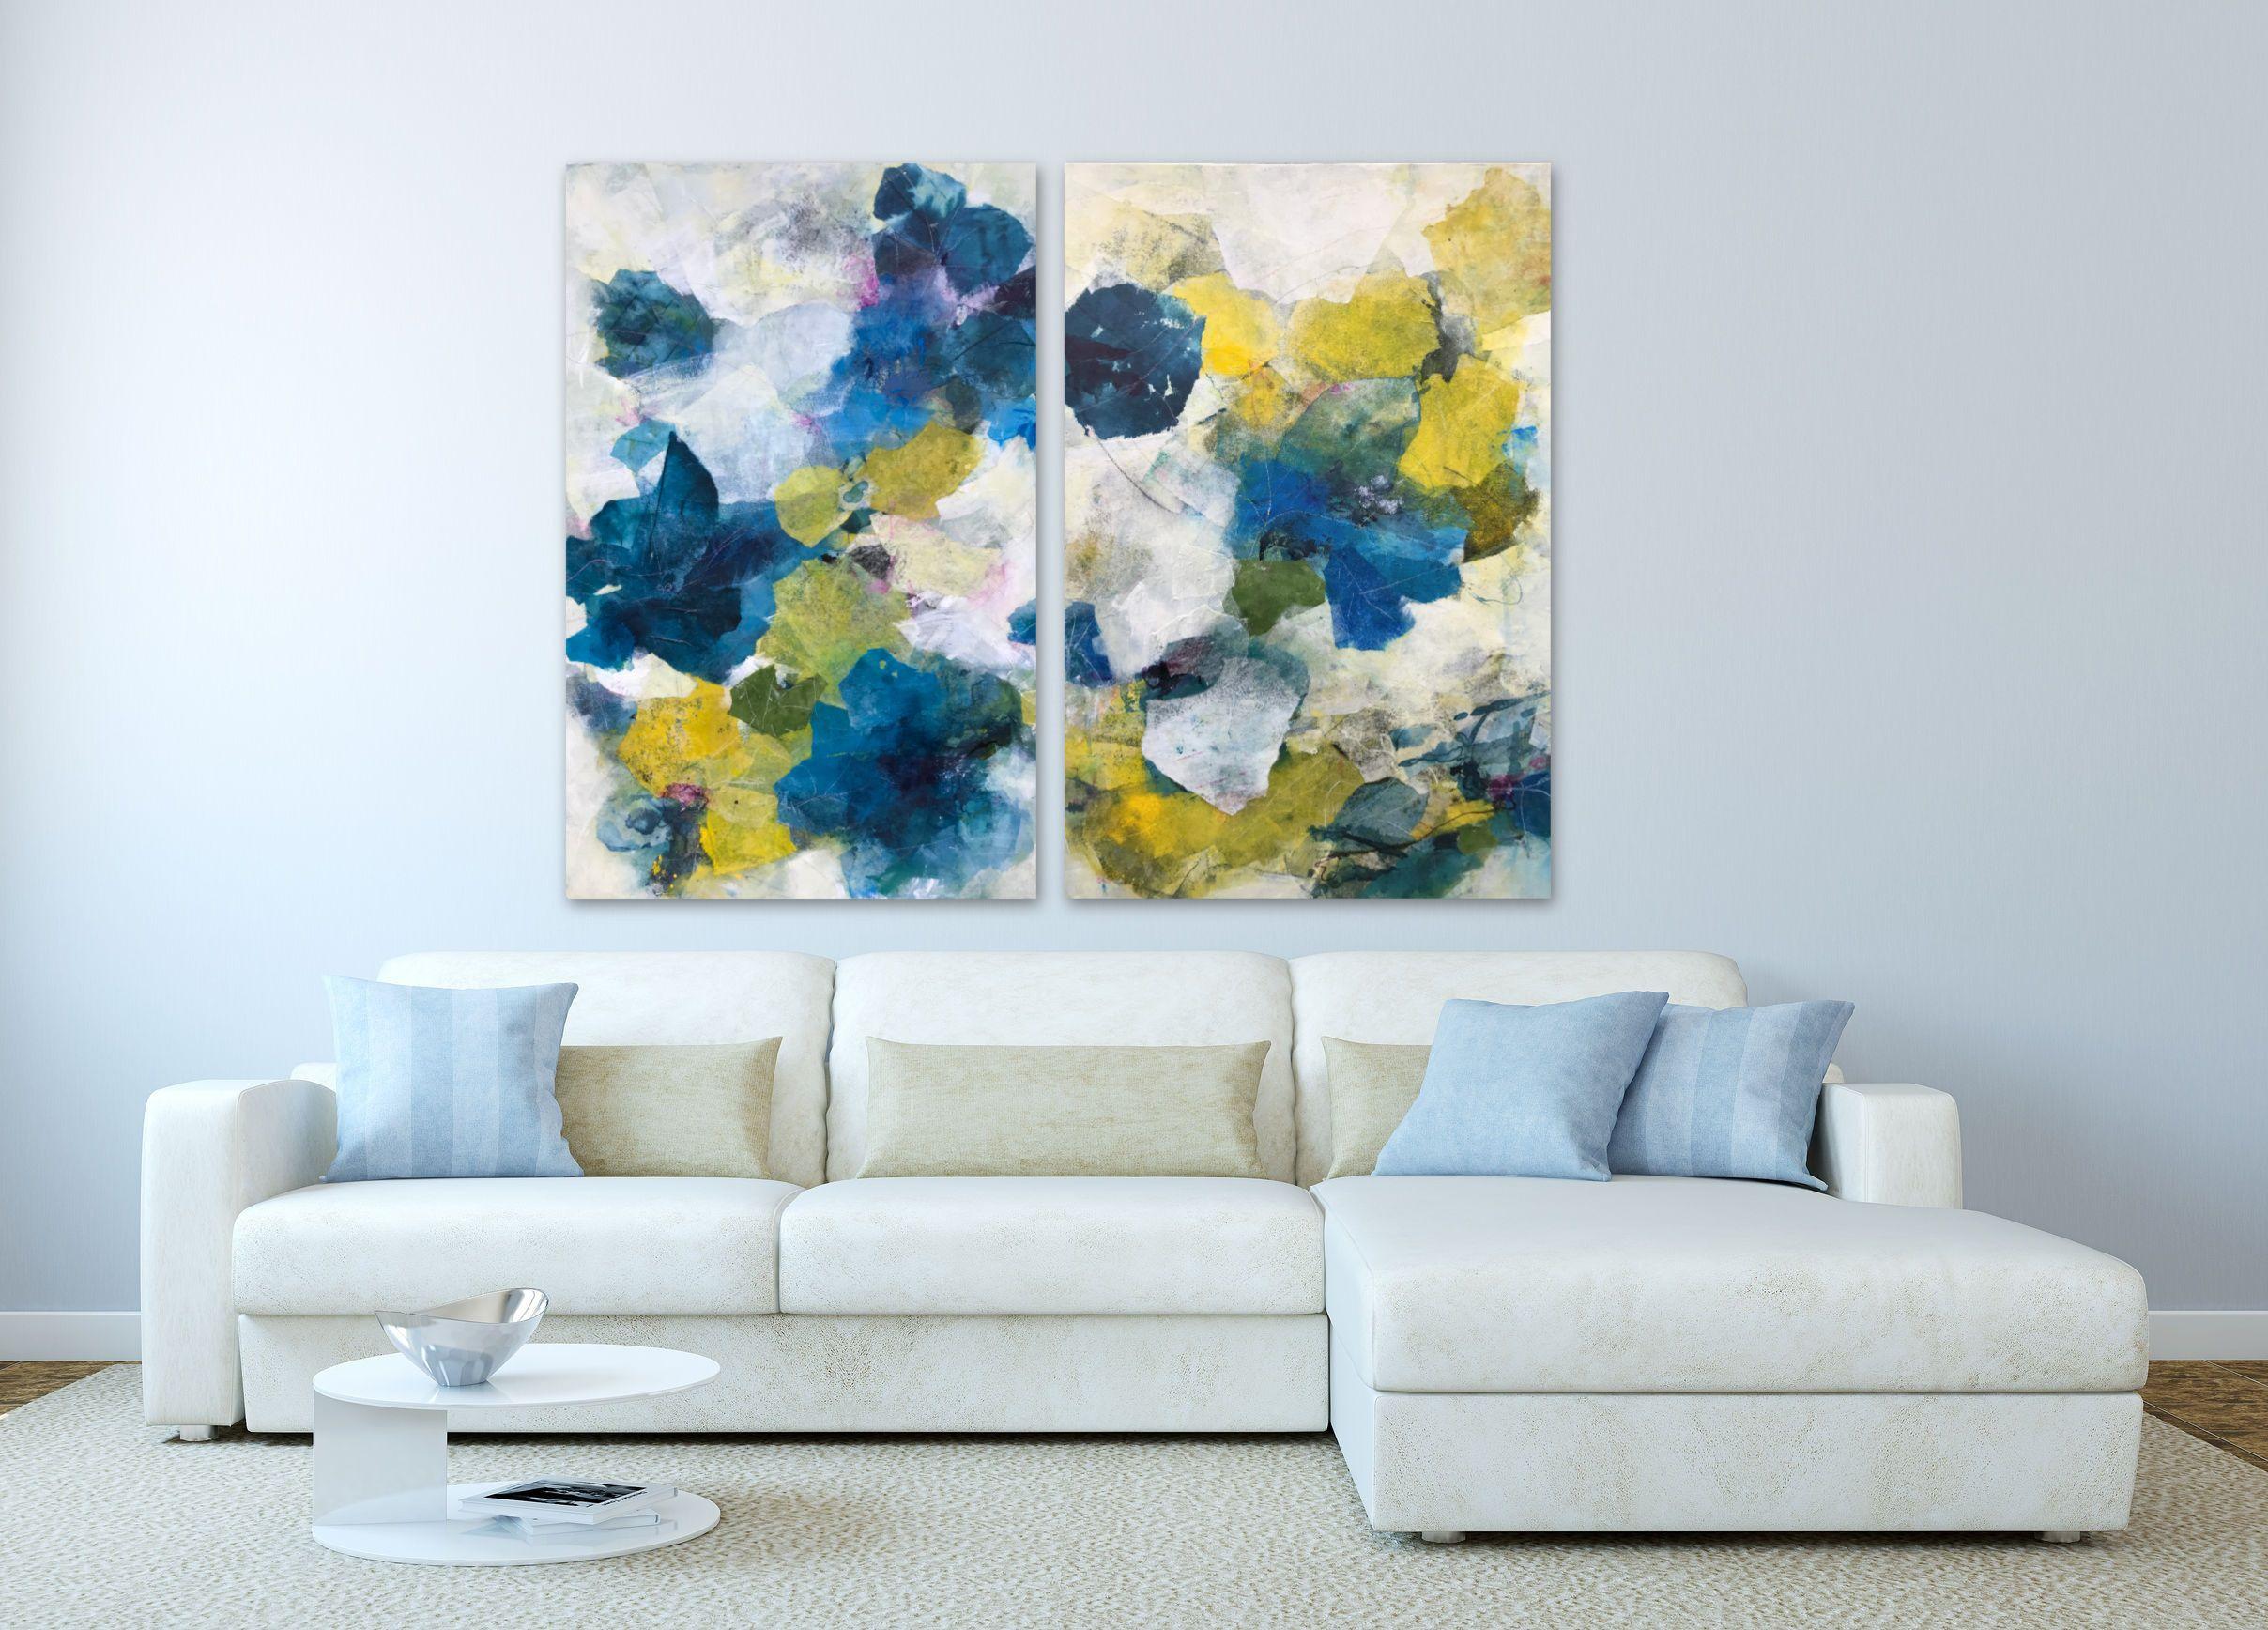 Growing Time, Painting, Acrylic on Canvas - Beige Abstract Painting by Angela Dierks